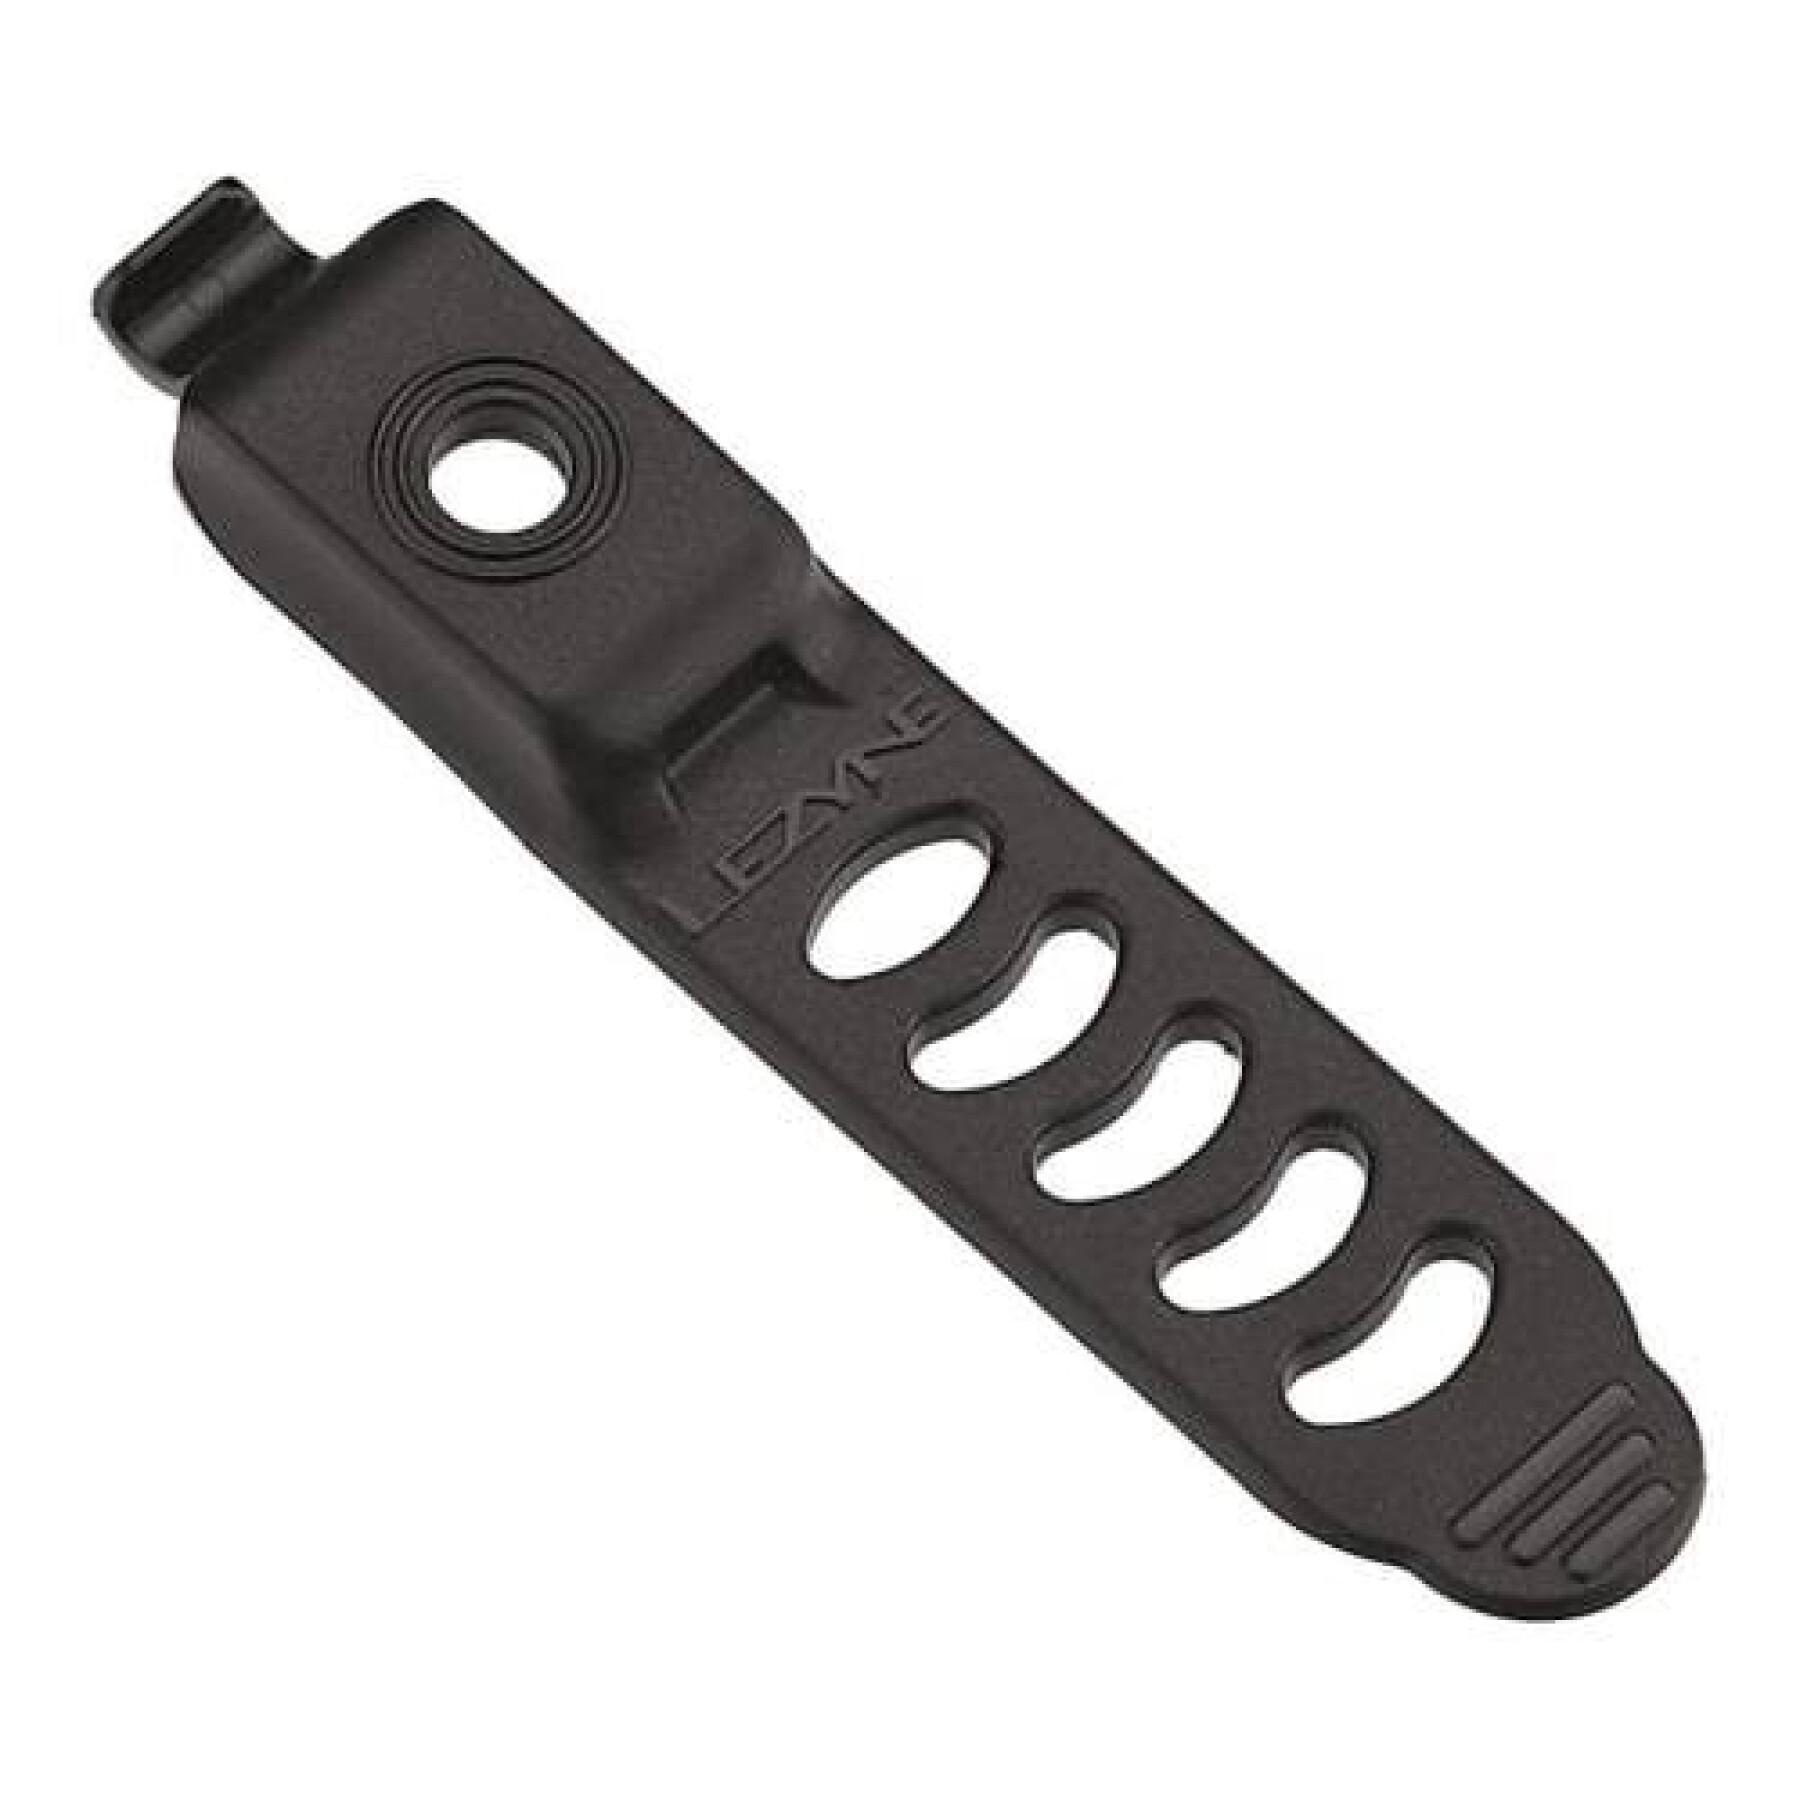 Replacement mounting strap for lights Lezyne Strap-Mini/Hecto/Micro/Lite/Macro